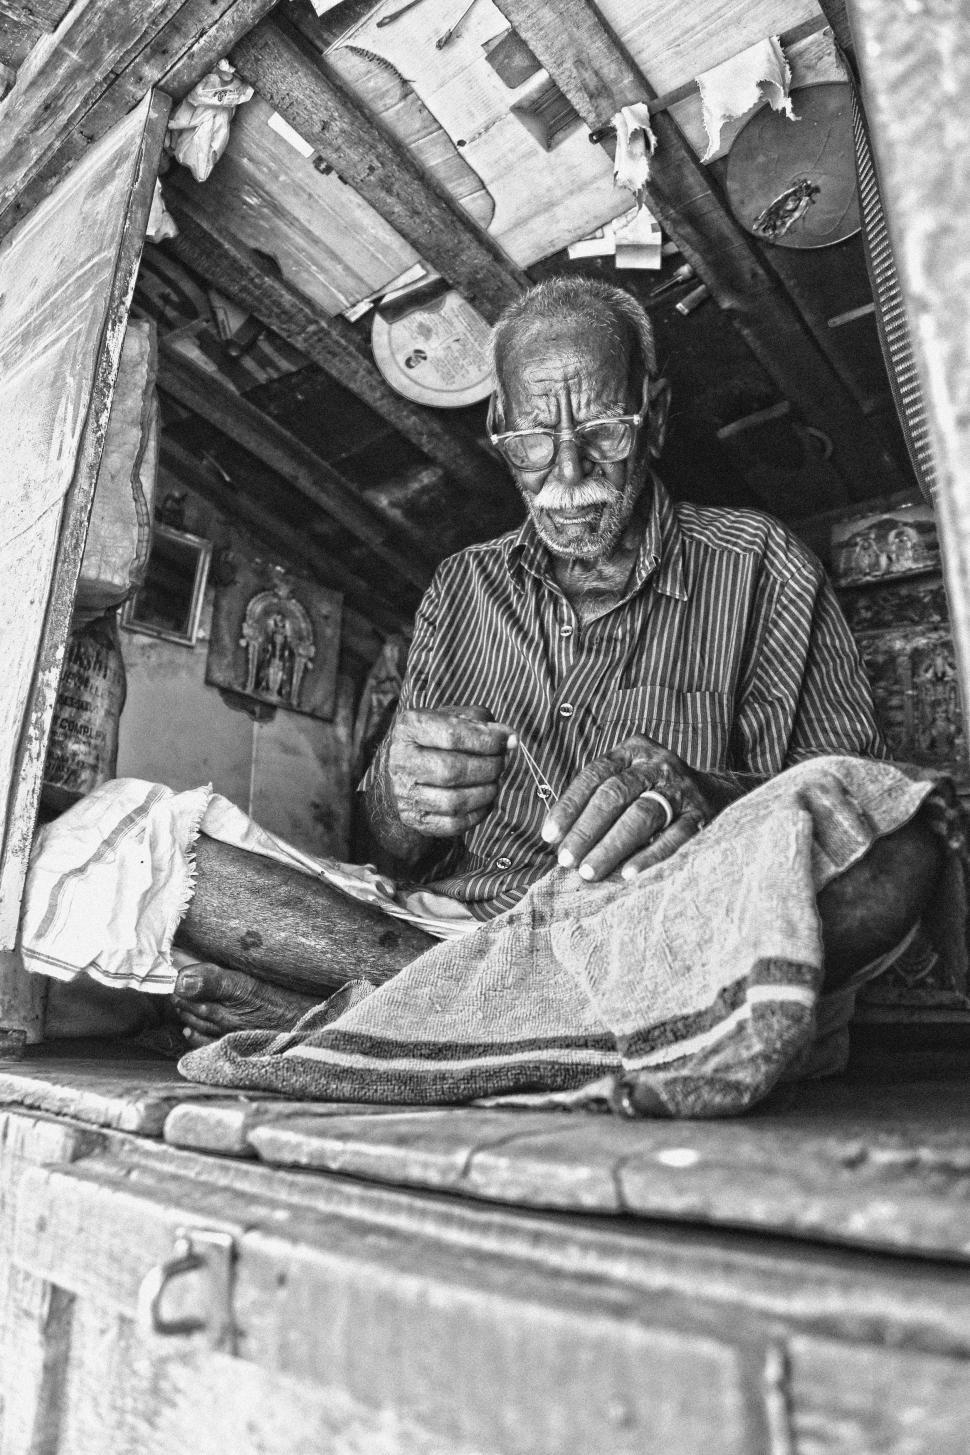 Free Image of Old Aged Indian Man With Spectacles - B&W 